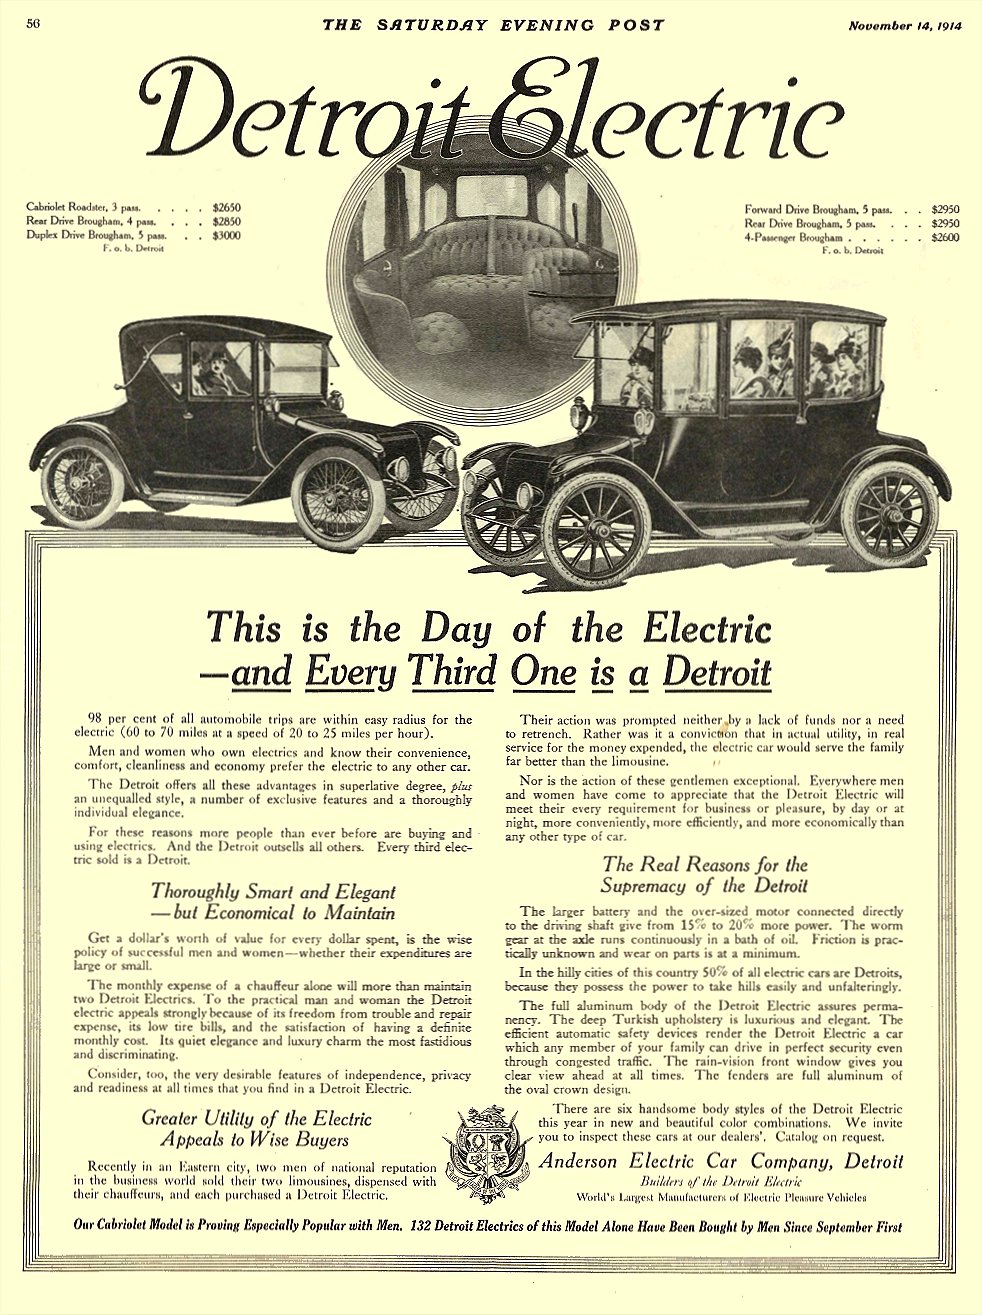 1915 11 14 DETROIT Electric This is the Day of the Electric The